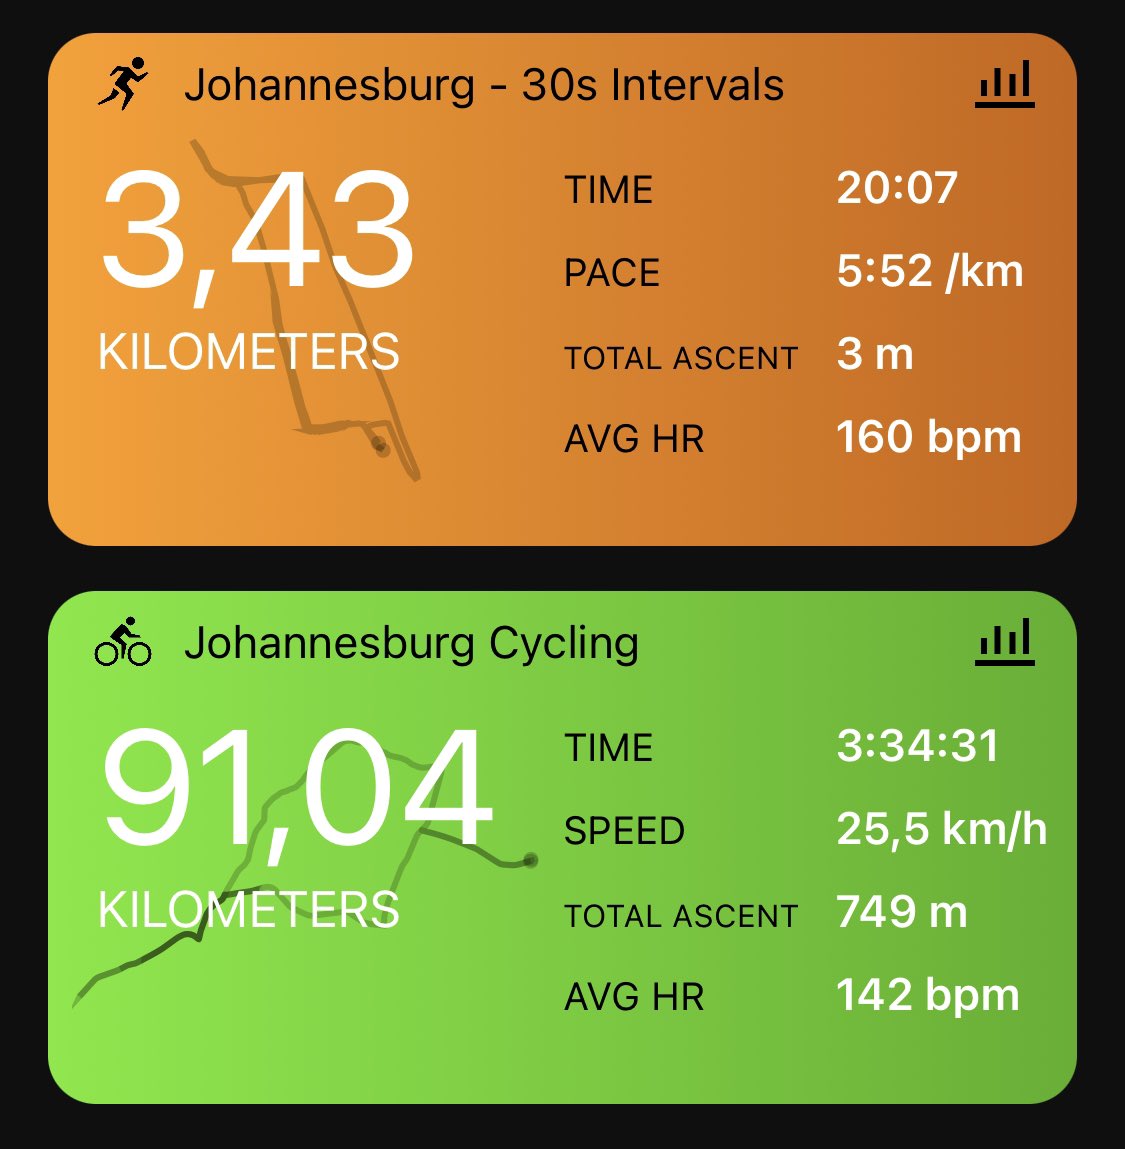 A good 91km cycling the 70.3 Ironman second leg distance🚴🏽‍♀️- followed by a 20 minutes brick run of 30s Intervals 🏃🏽‍♀️

#TriathlonTraining
#FetchYourBody2023 
#RunningWithTumiSole